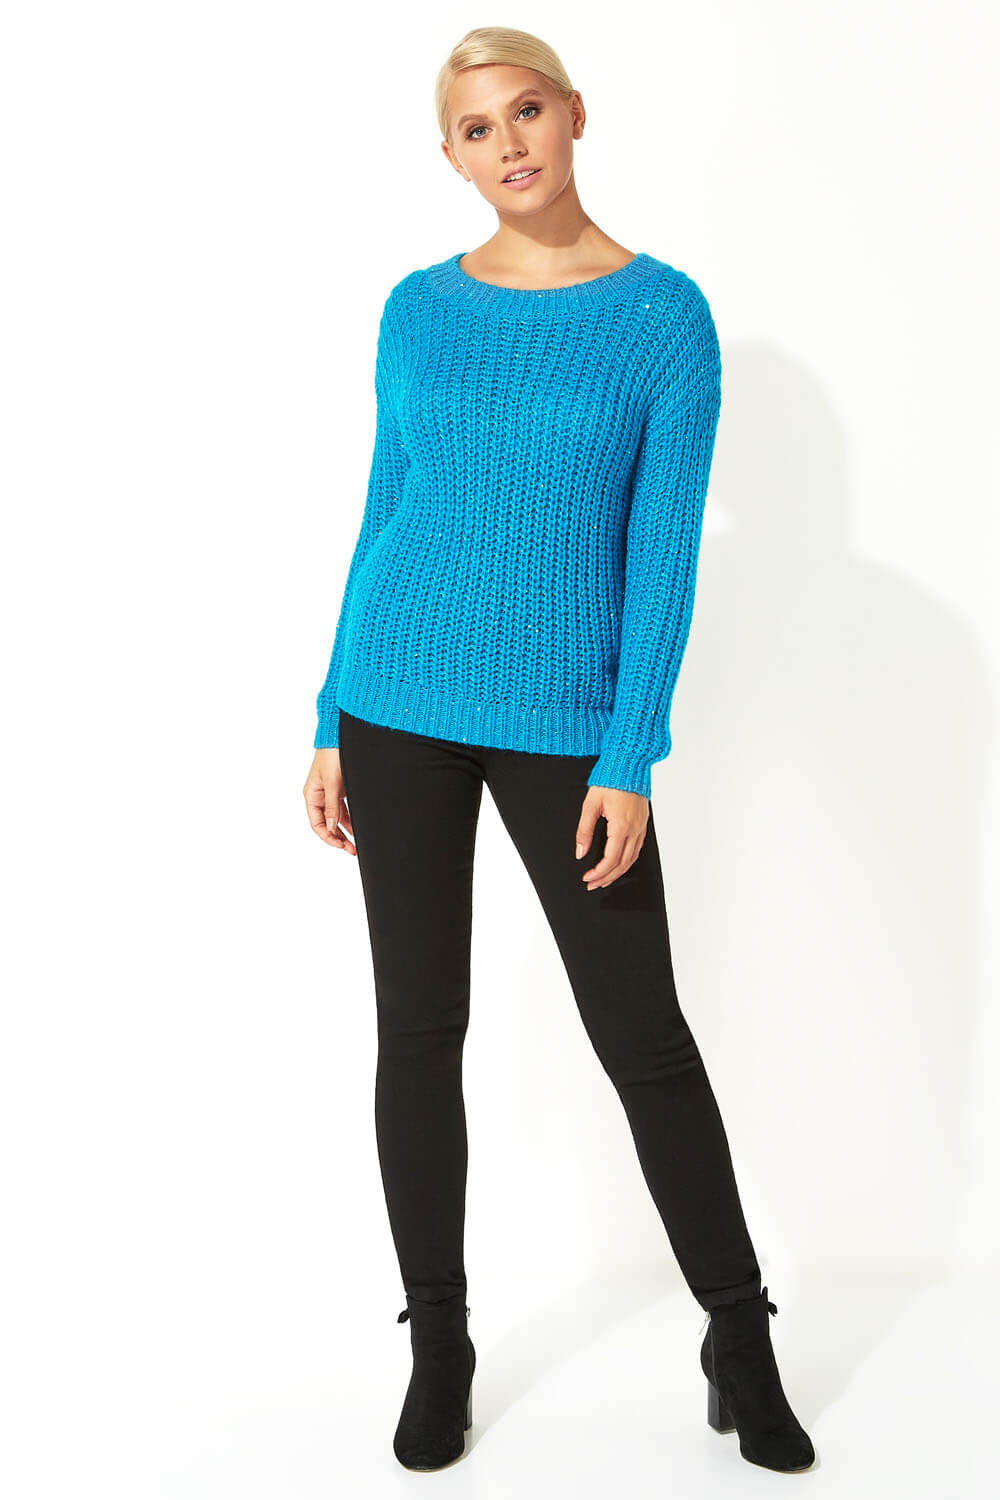 Turquoise Chunky Knit Sequin Jumper , Image 2 of 5